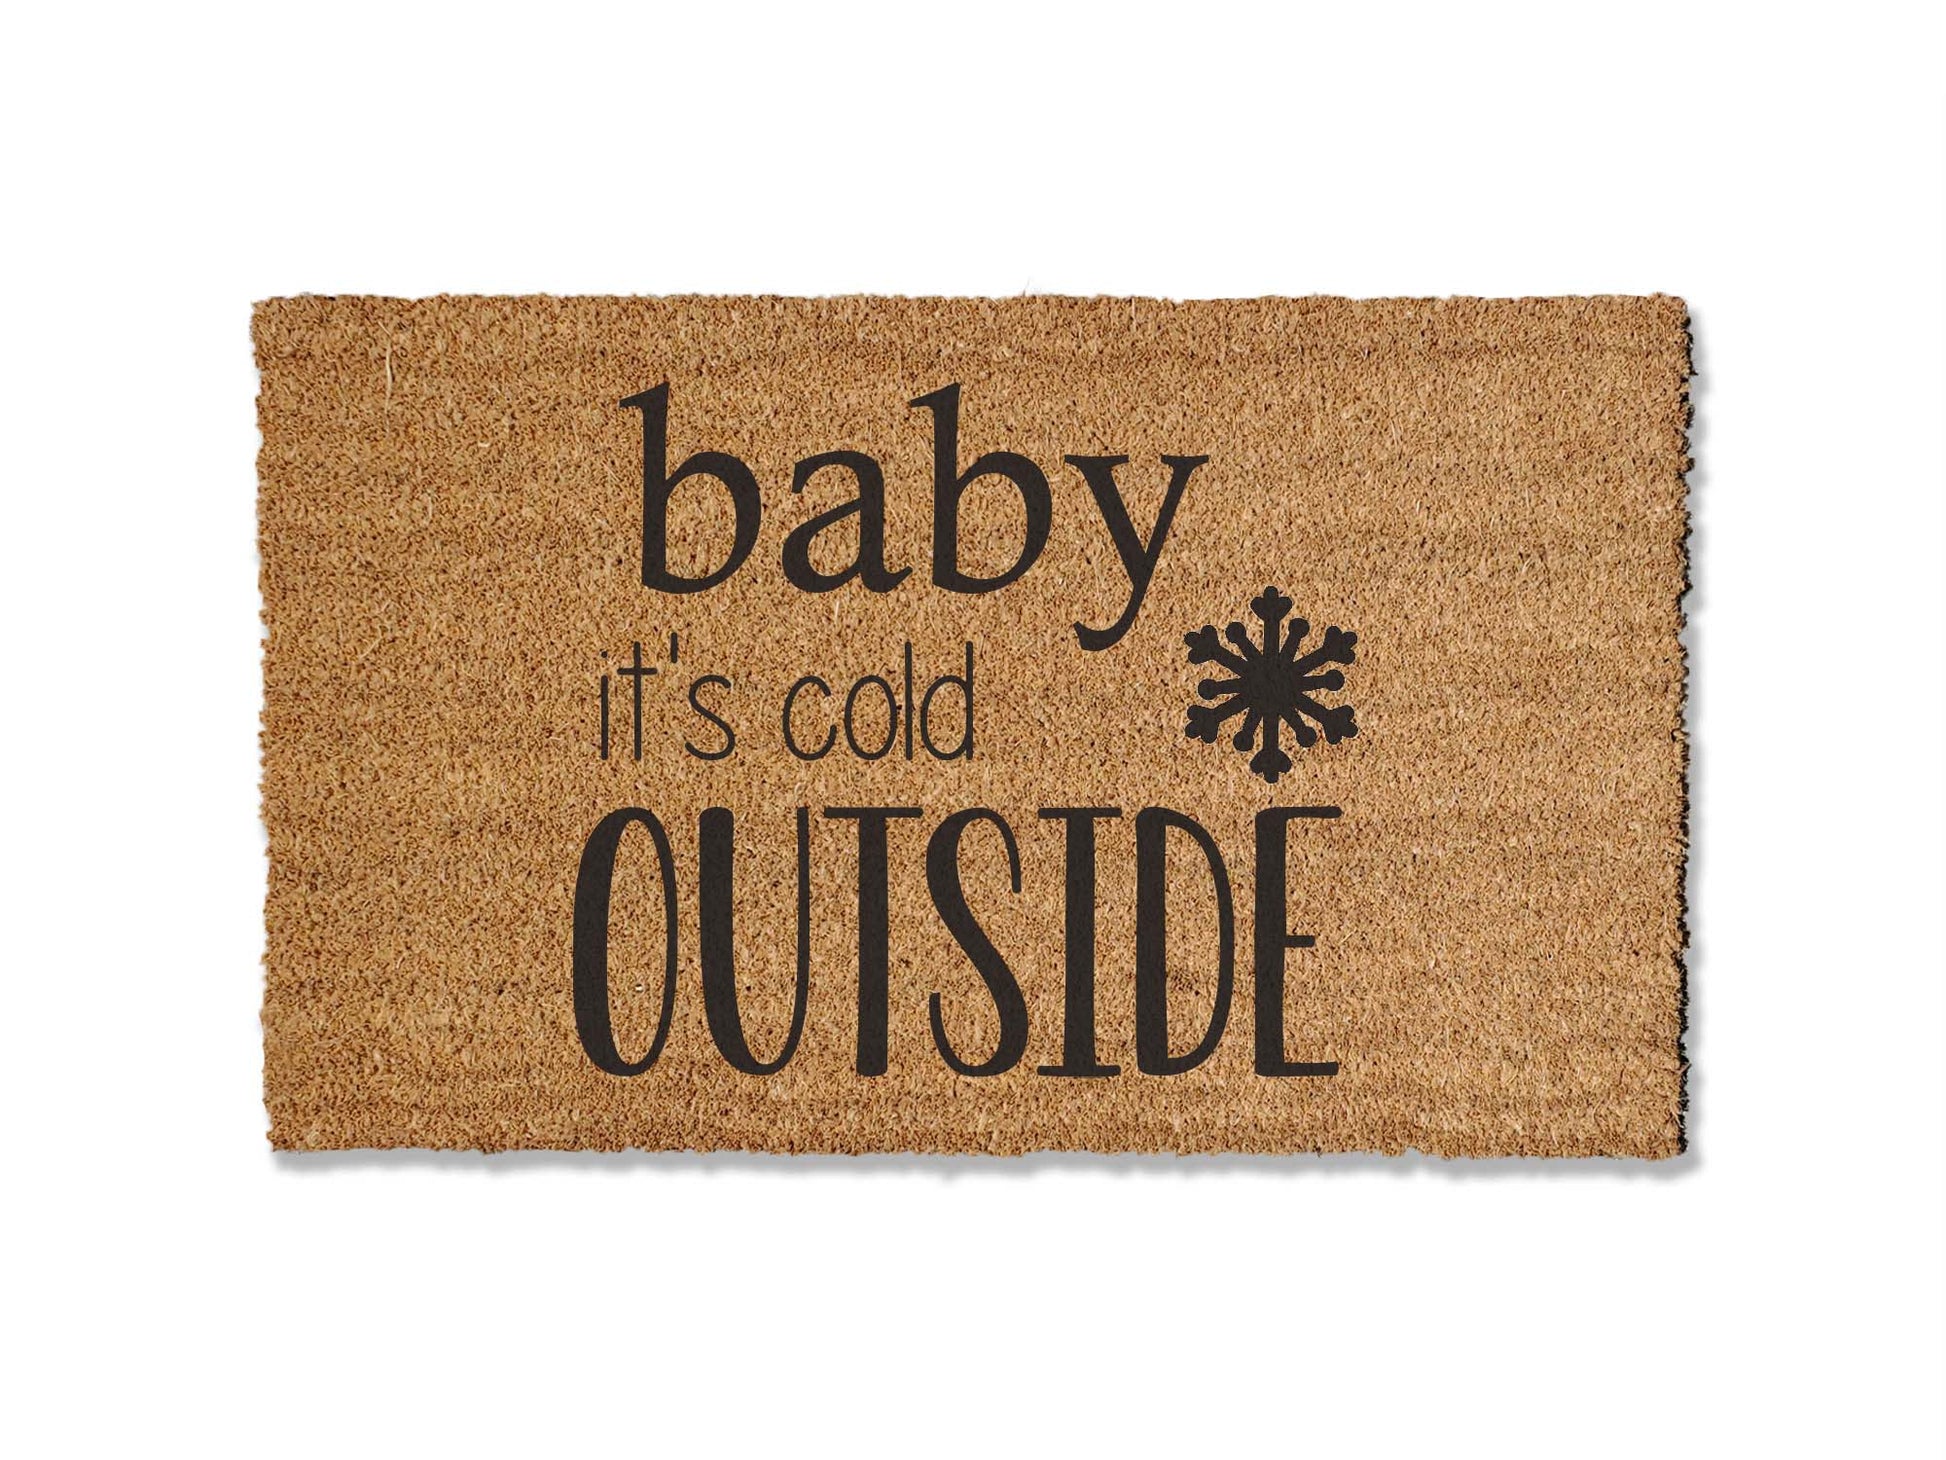 A coir doormat that is 18 inches by 30 inches and has a the text baby it's cold outside with a snowflake painted on it.